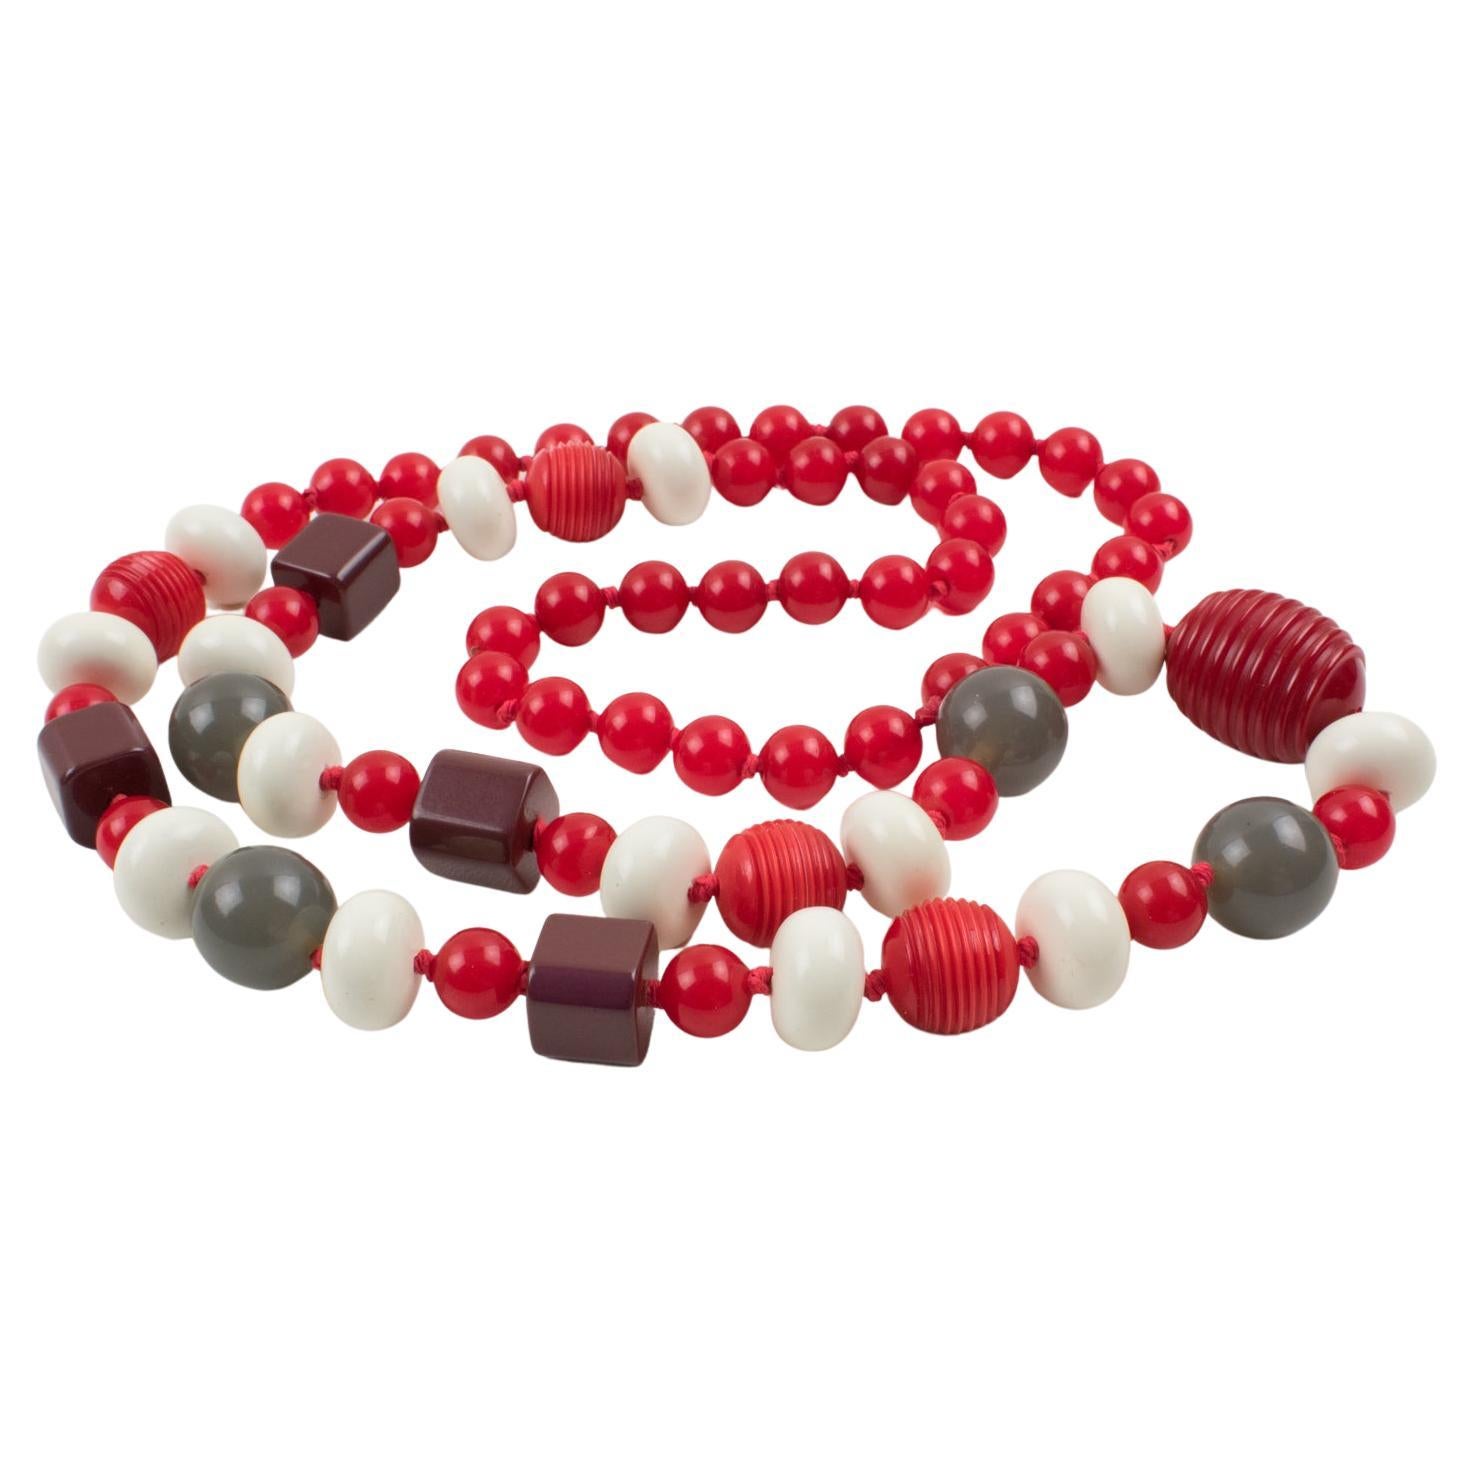 This stunning extra-long Bakelite and Lucite beaded necklace features assorted beads in various shapes: round, tomato, little square, and oval, some with carving. The matching chic colors, magenta red, purple plum, and mouse gray are contrasted with